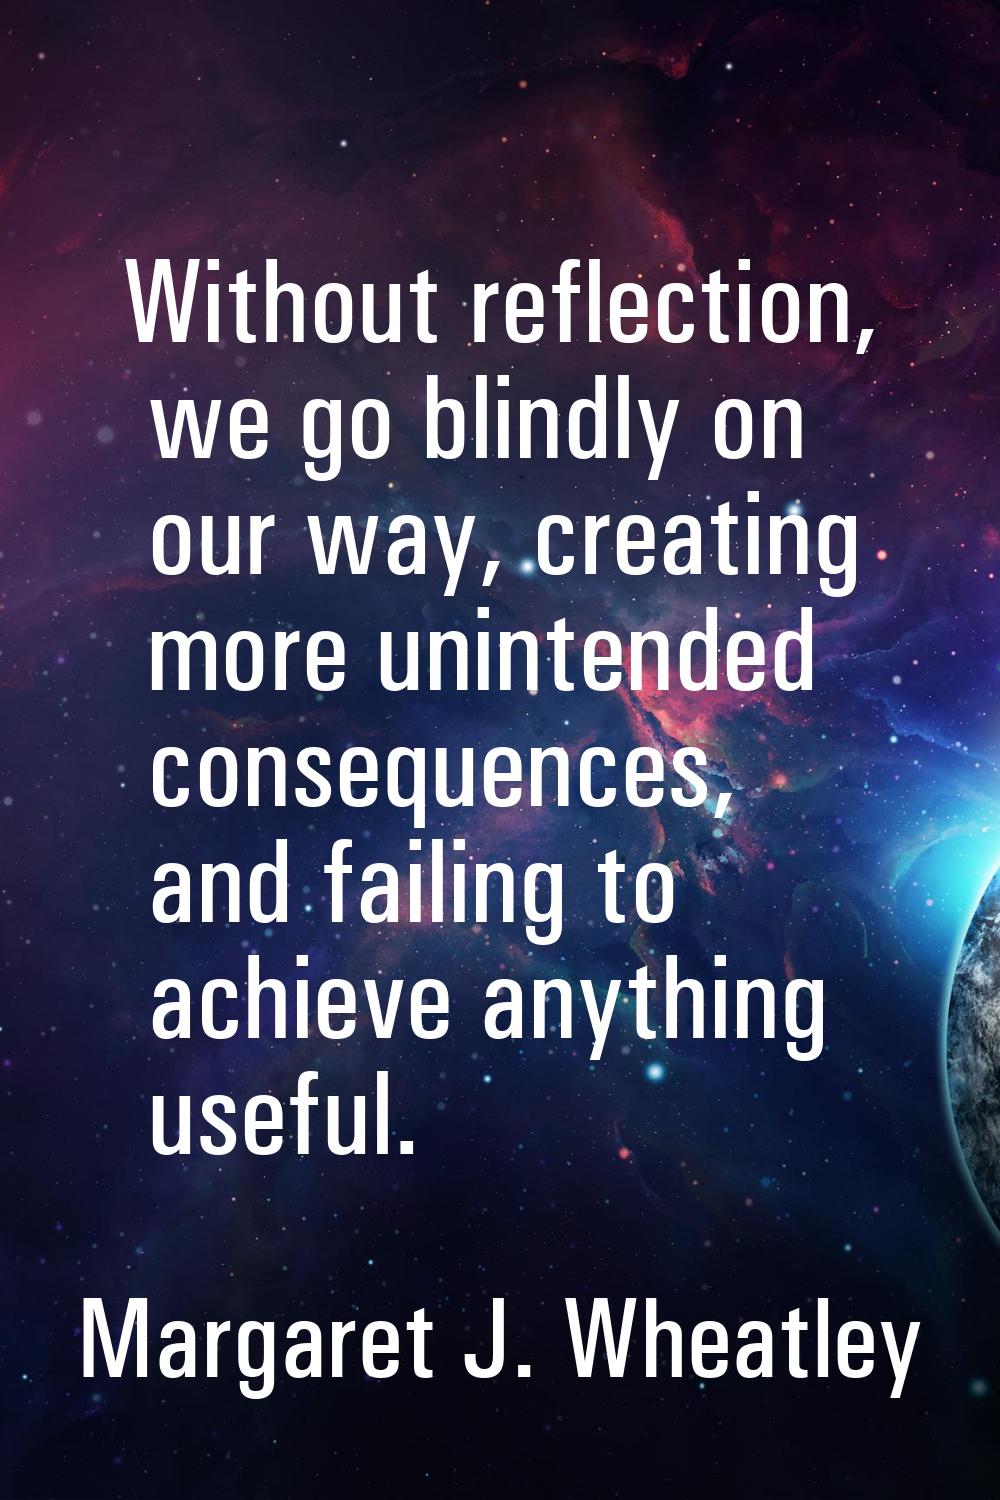 Without reflection, we go blindly on our way, creating more unintended consequences, and failing to